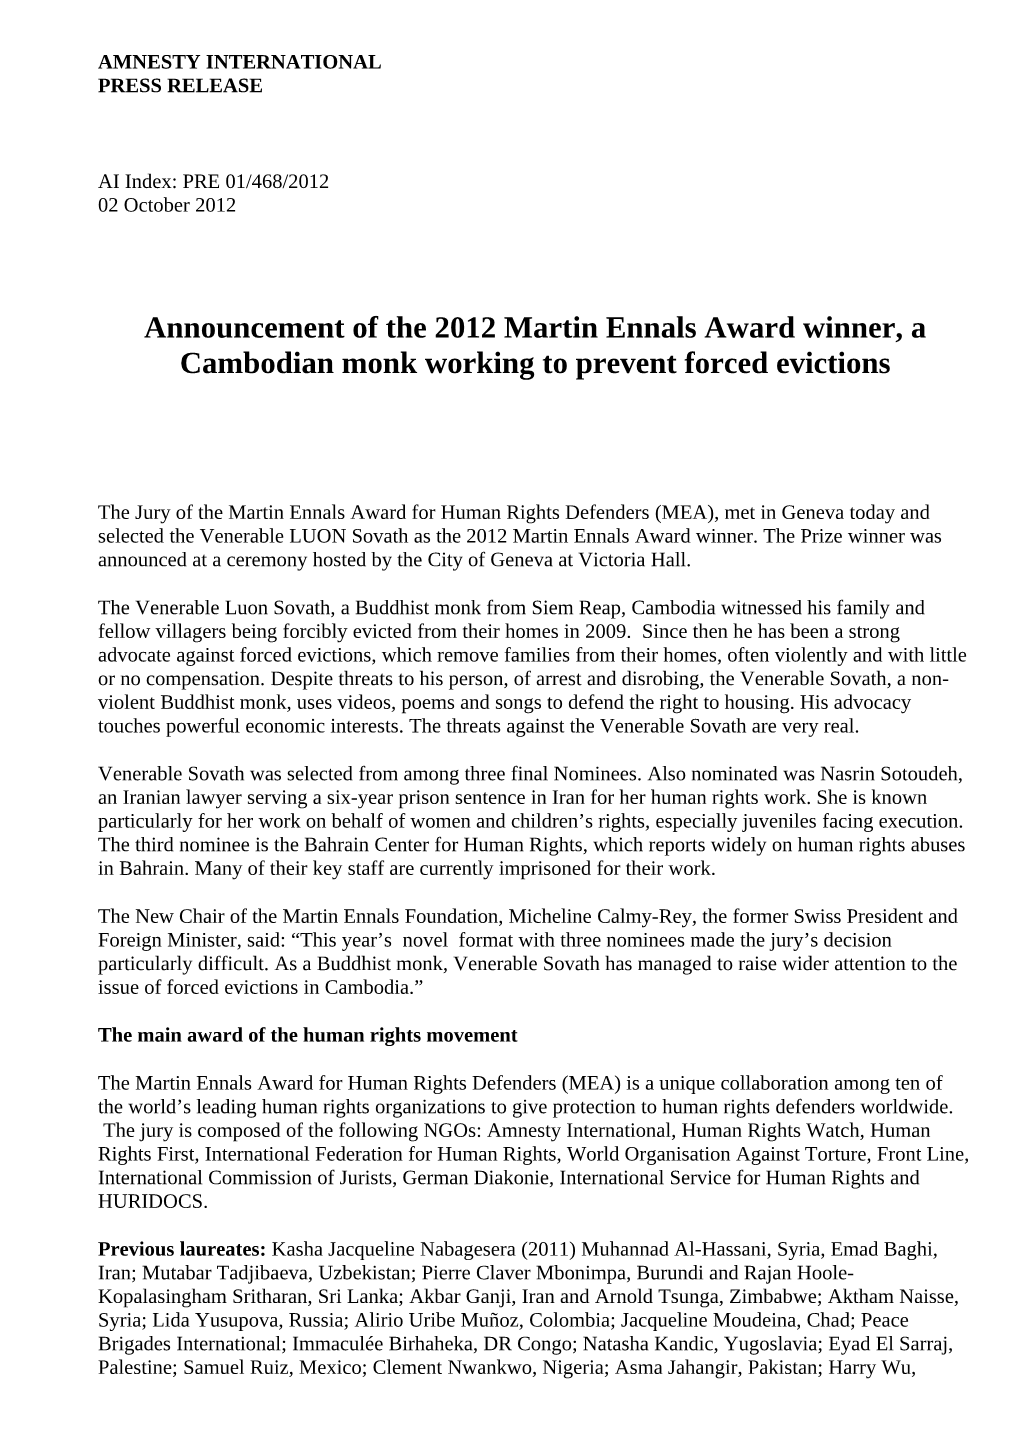 Announcement of the 2012 Martin Ennals Award Winner, a Cambodian Monk Working to Prevent Forced Evictions